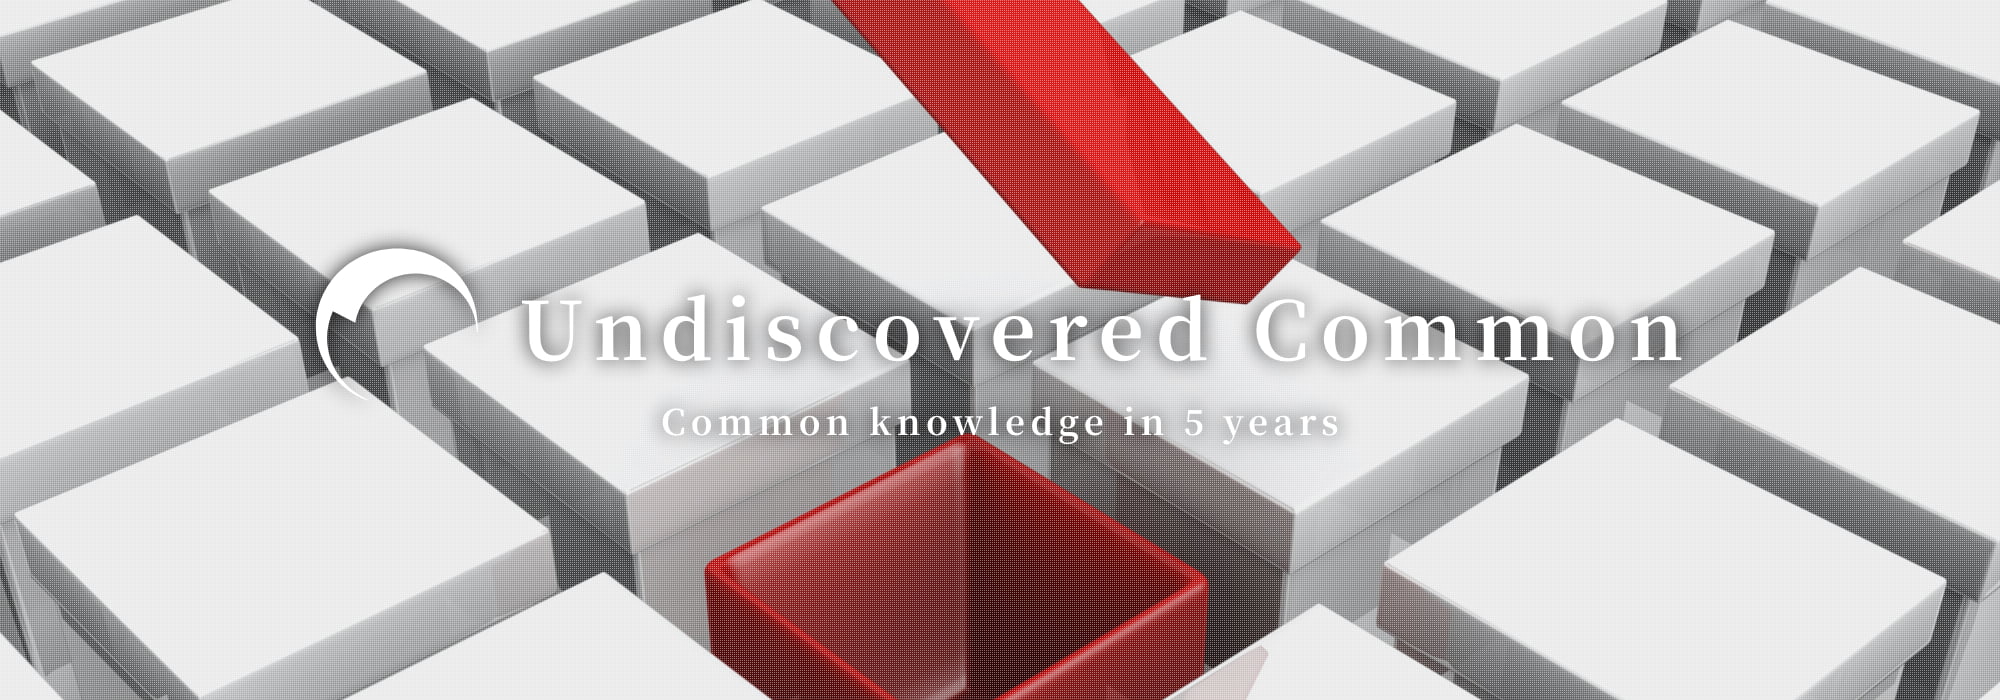 Undiscovered Common : Common knowledge in 5 years